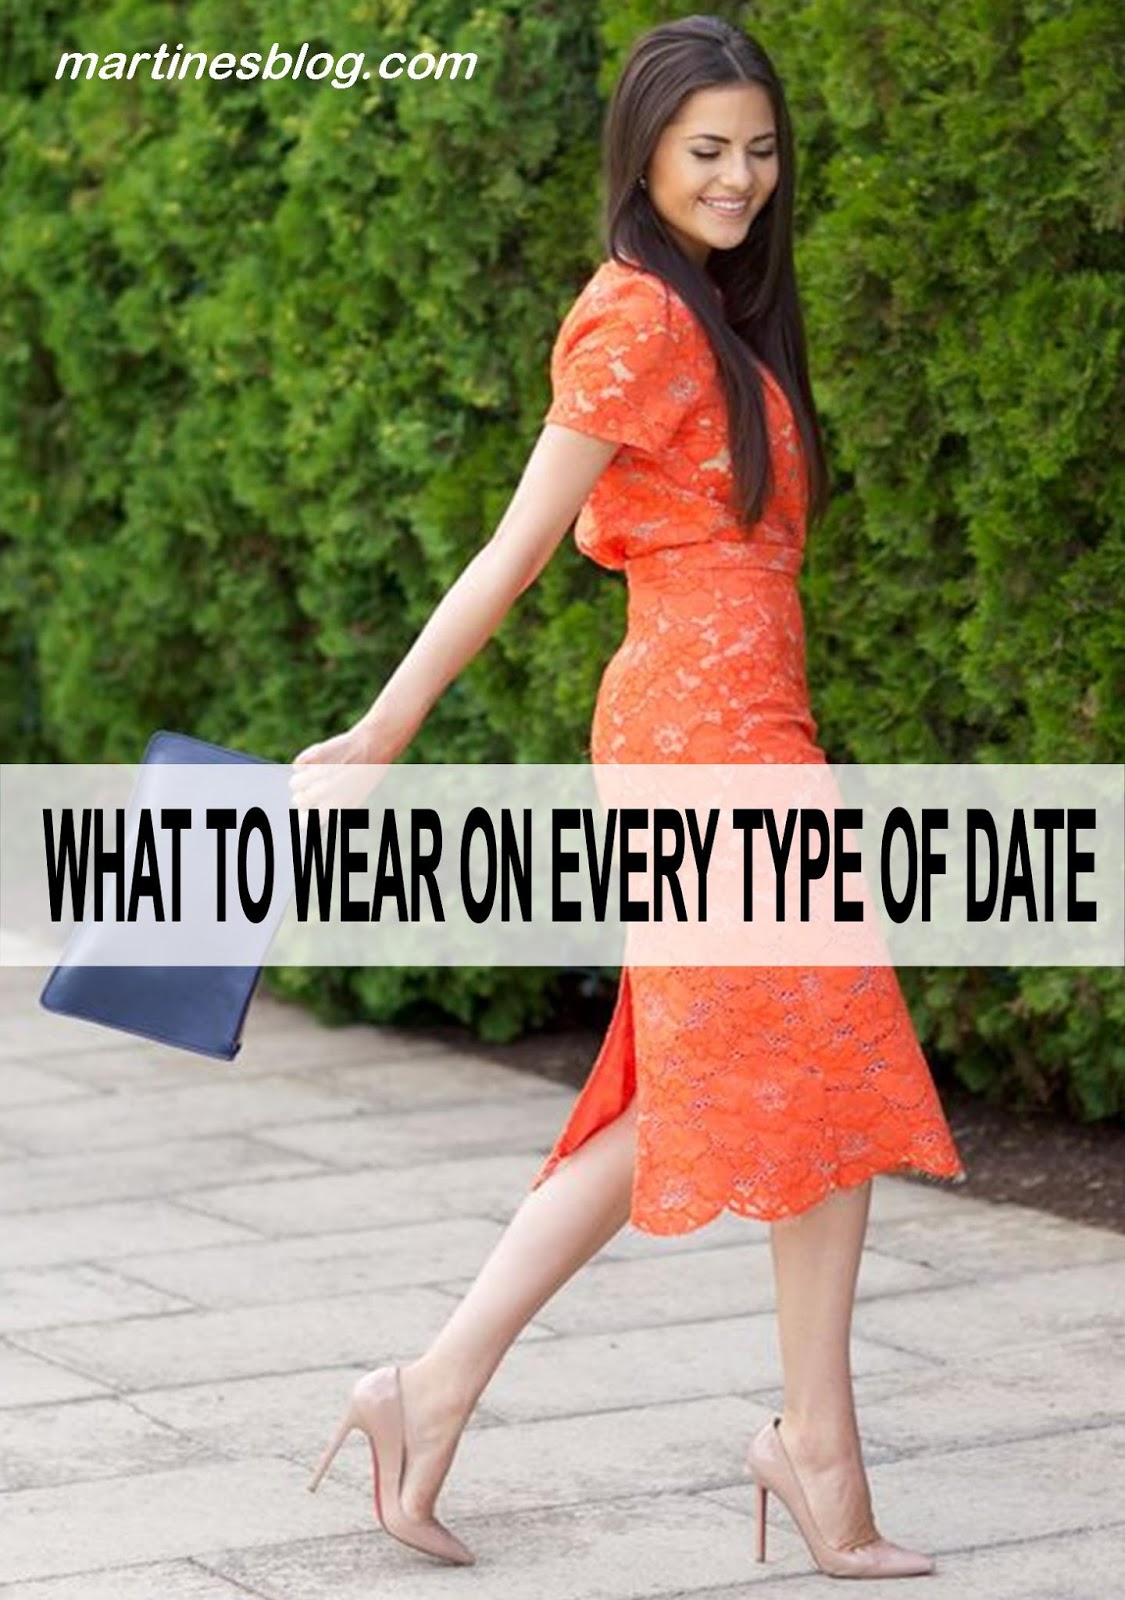 WHAT TO WEAR ON EVERY TYPE OF DATE